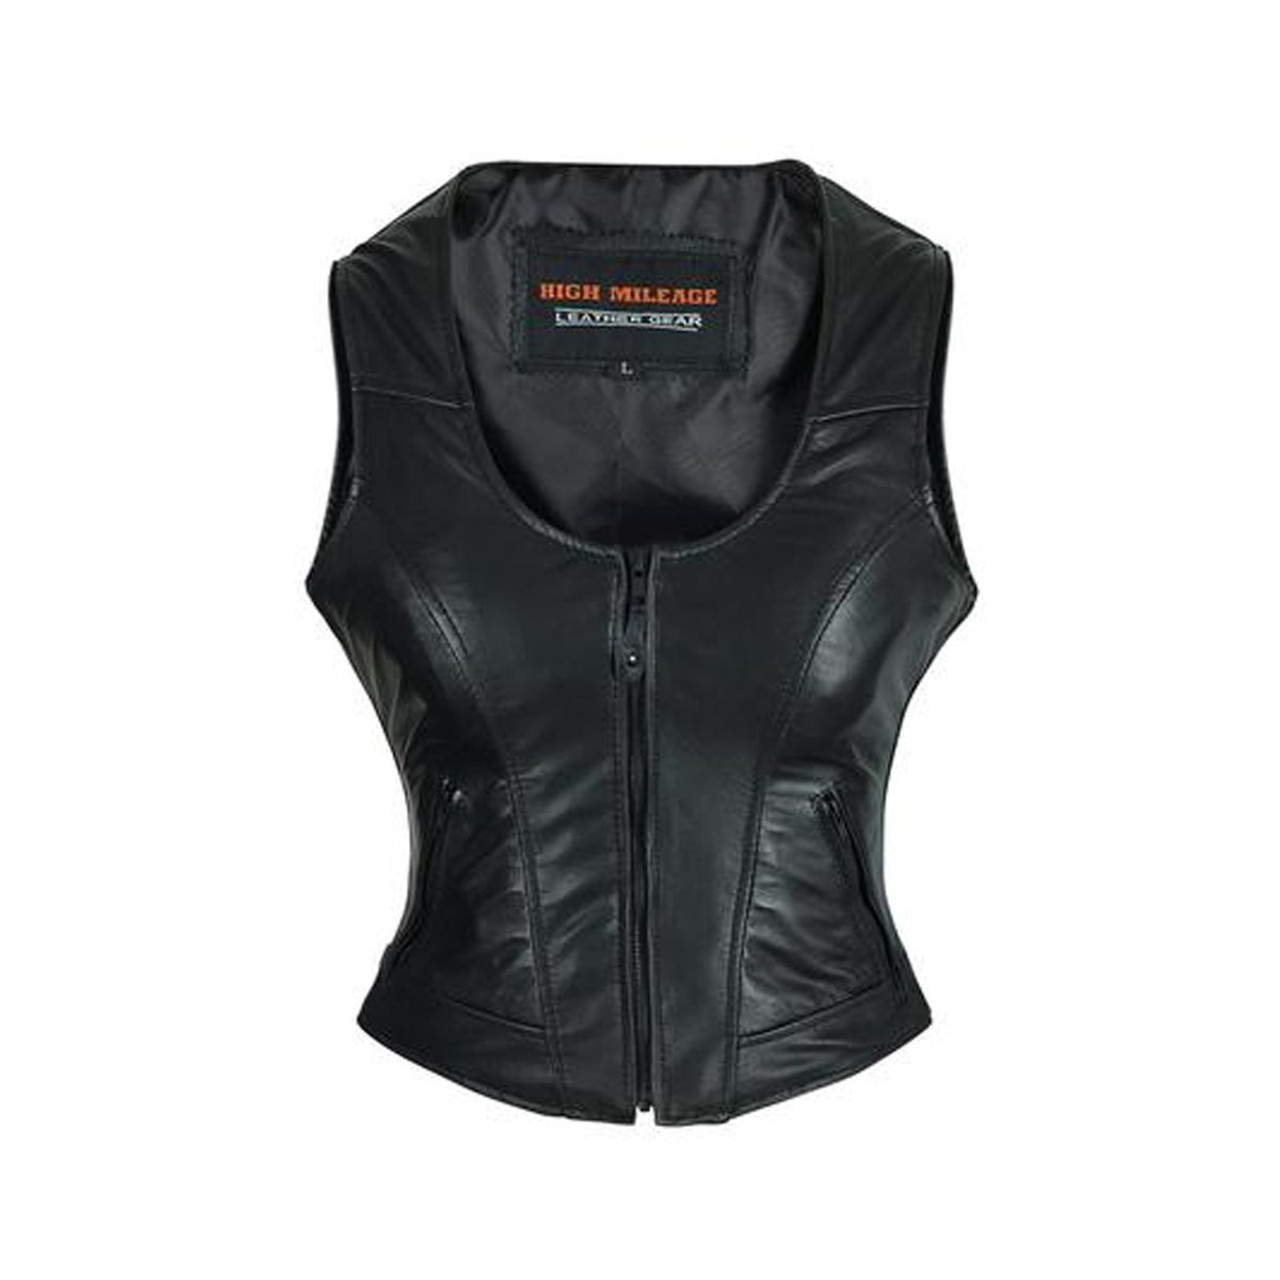 Stupefying Gallery Of motorcycle womens vest Pictures - WOW motorcycle